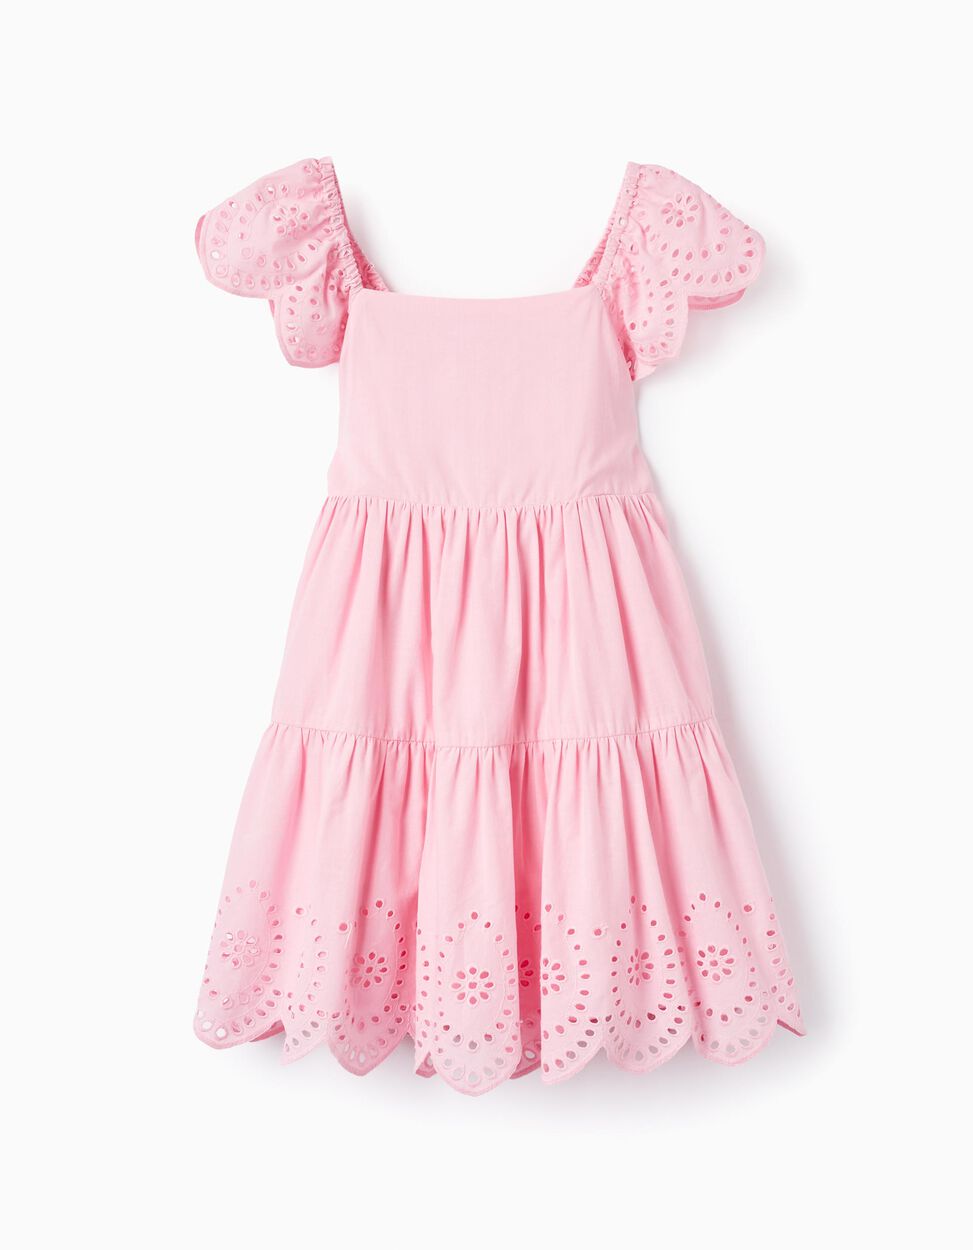 Buy Online Cotton Dress with English Embroidery for Girls, Pink